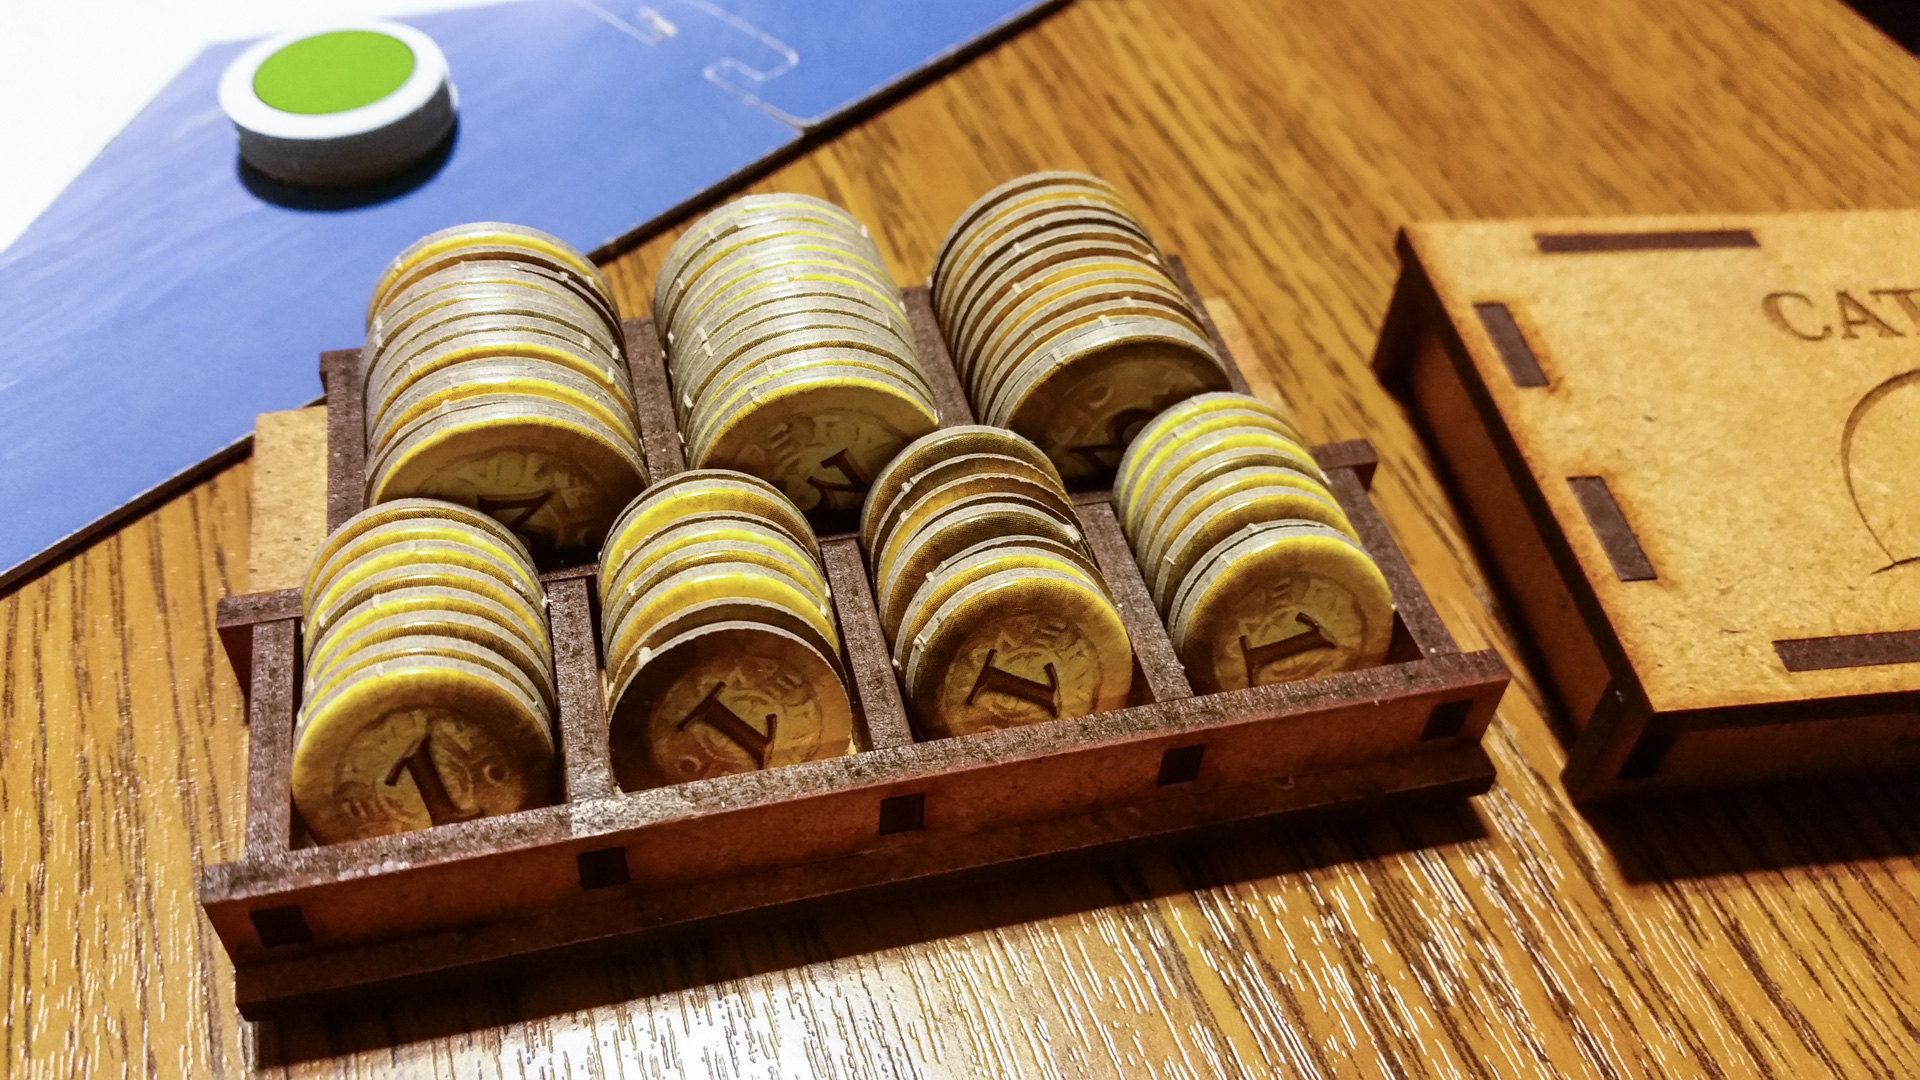 Settlers of Catan Box with Coins